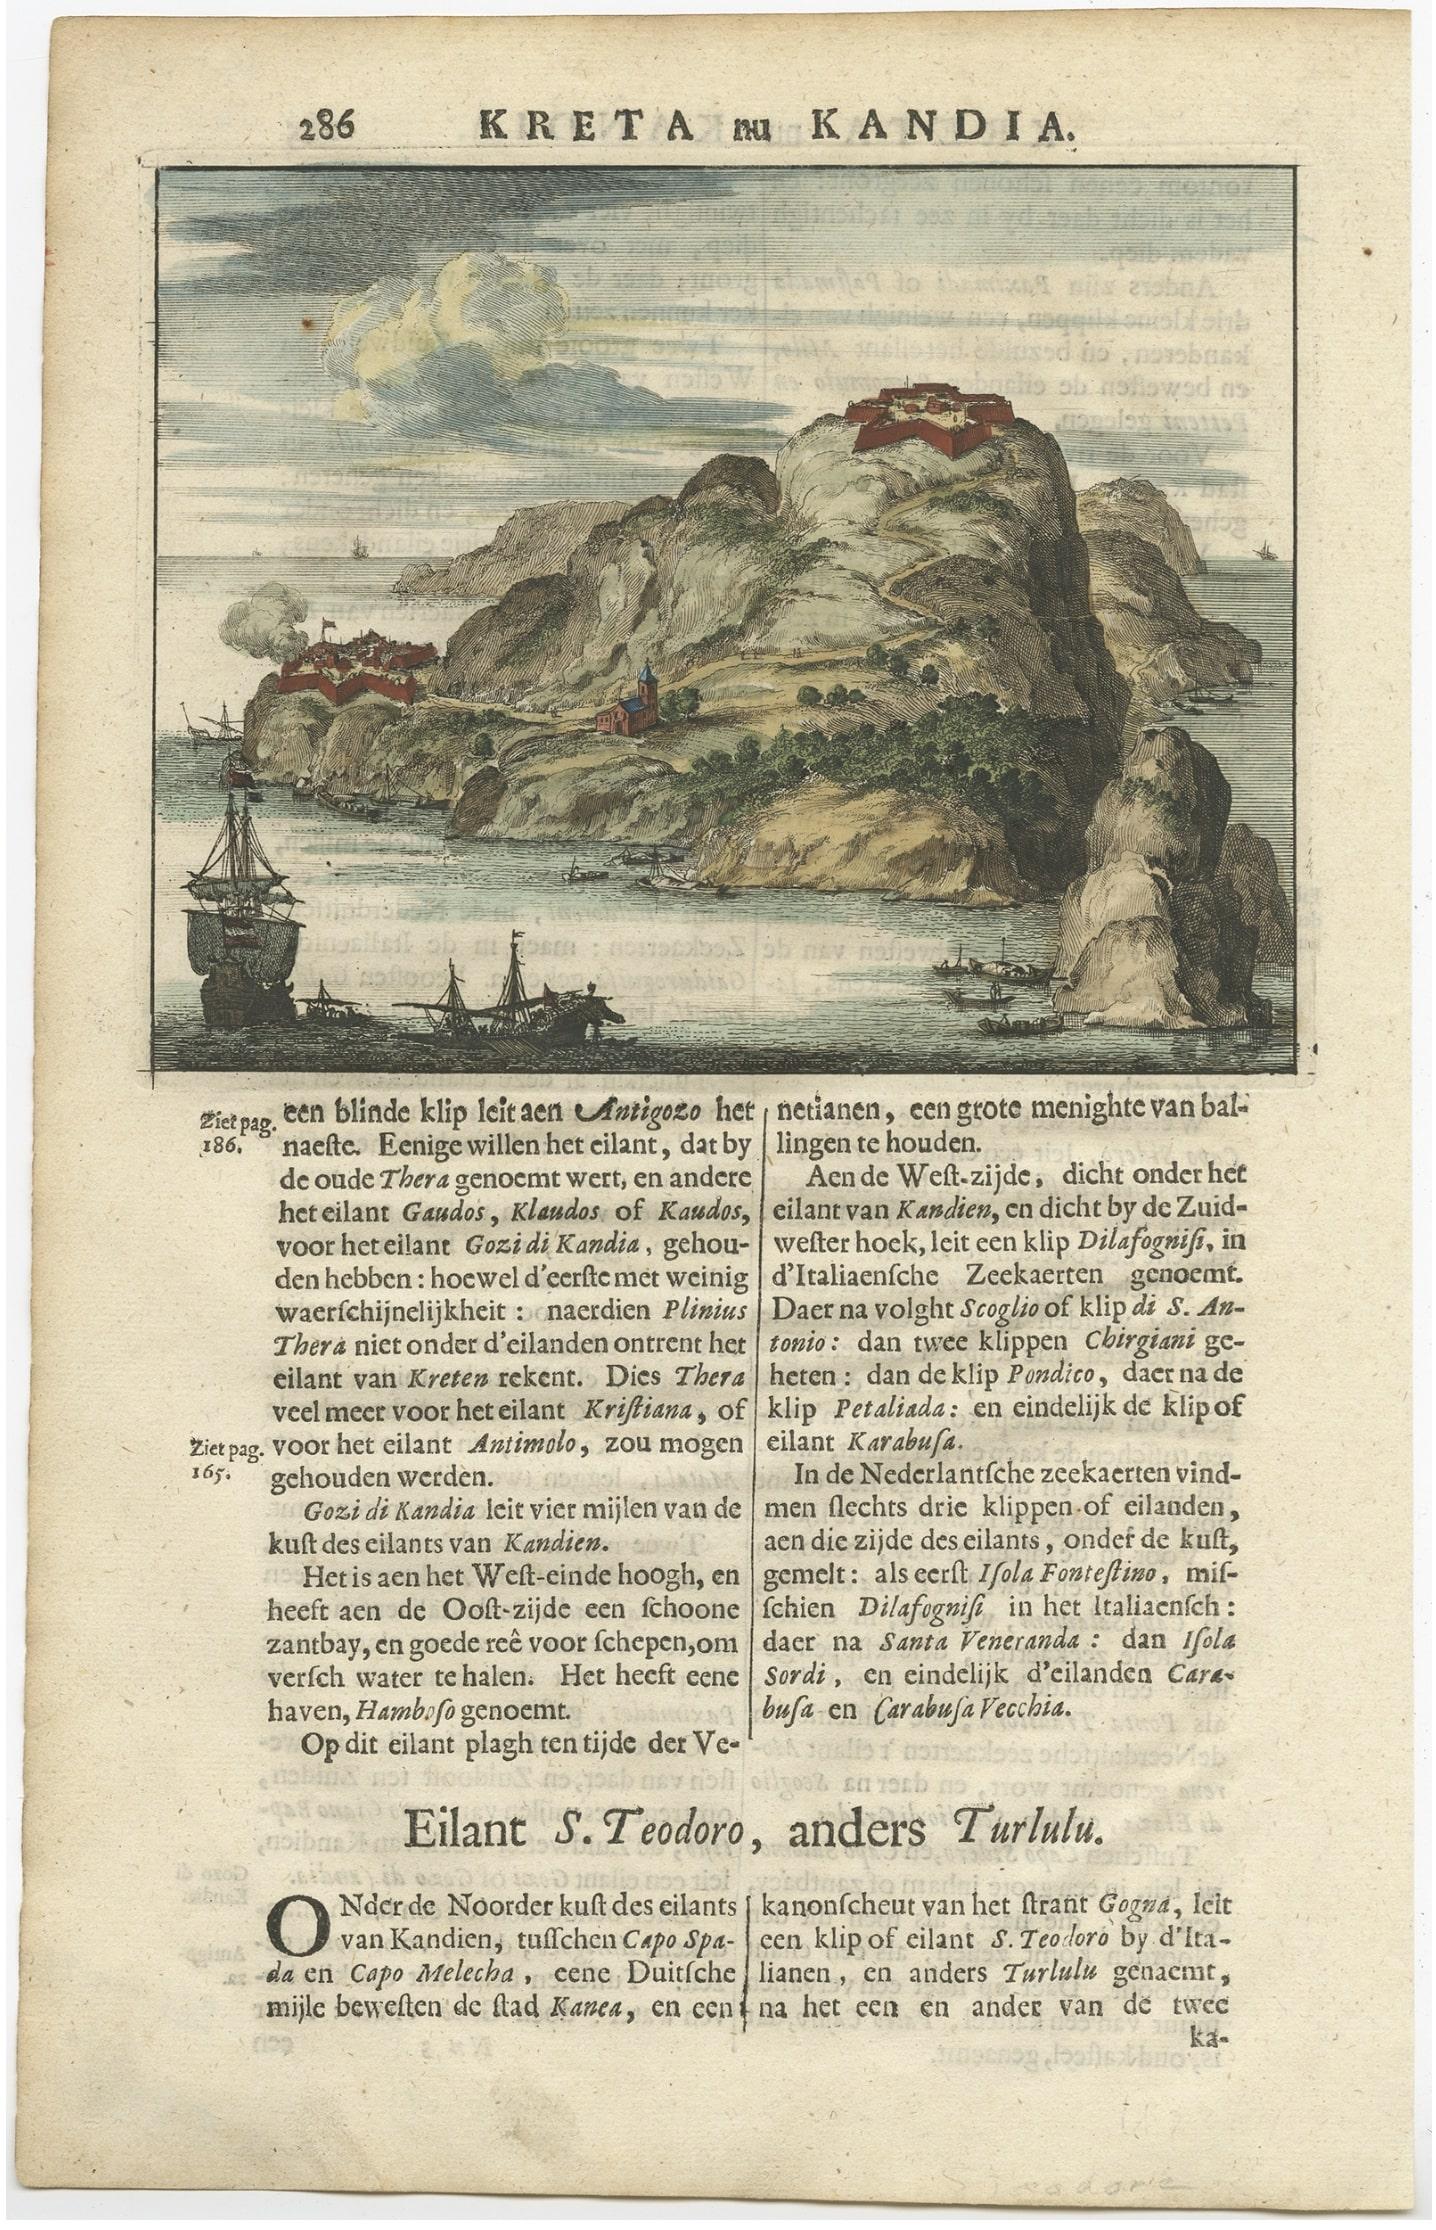 Description: Untitled print of one of the islands of Greece, most likely Gavdopoula (located south of Crete). 

Gavdopoula is an islet located north-west of its larger neighbour, Gavdos, in the Libyan Sea. It is located to the south of Crete, of